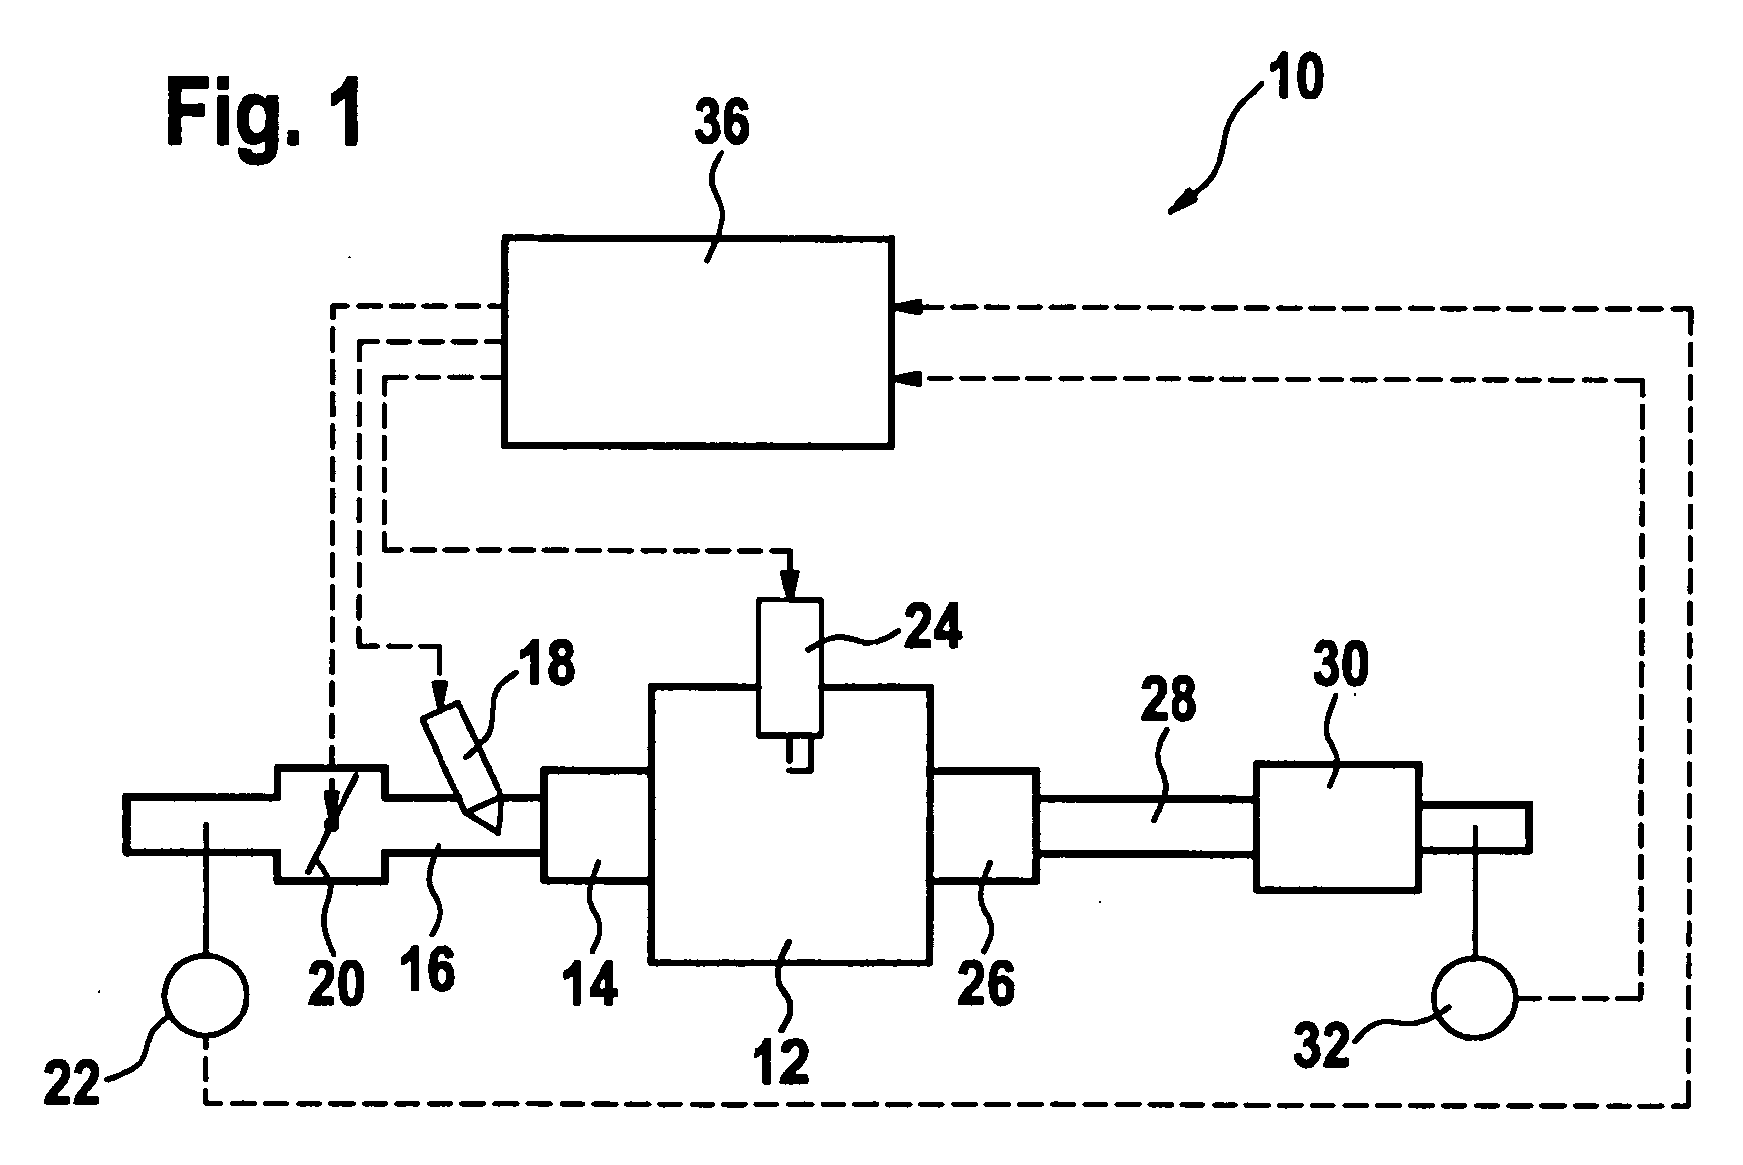 Method for Operating an Internal Combustion Engine